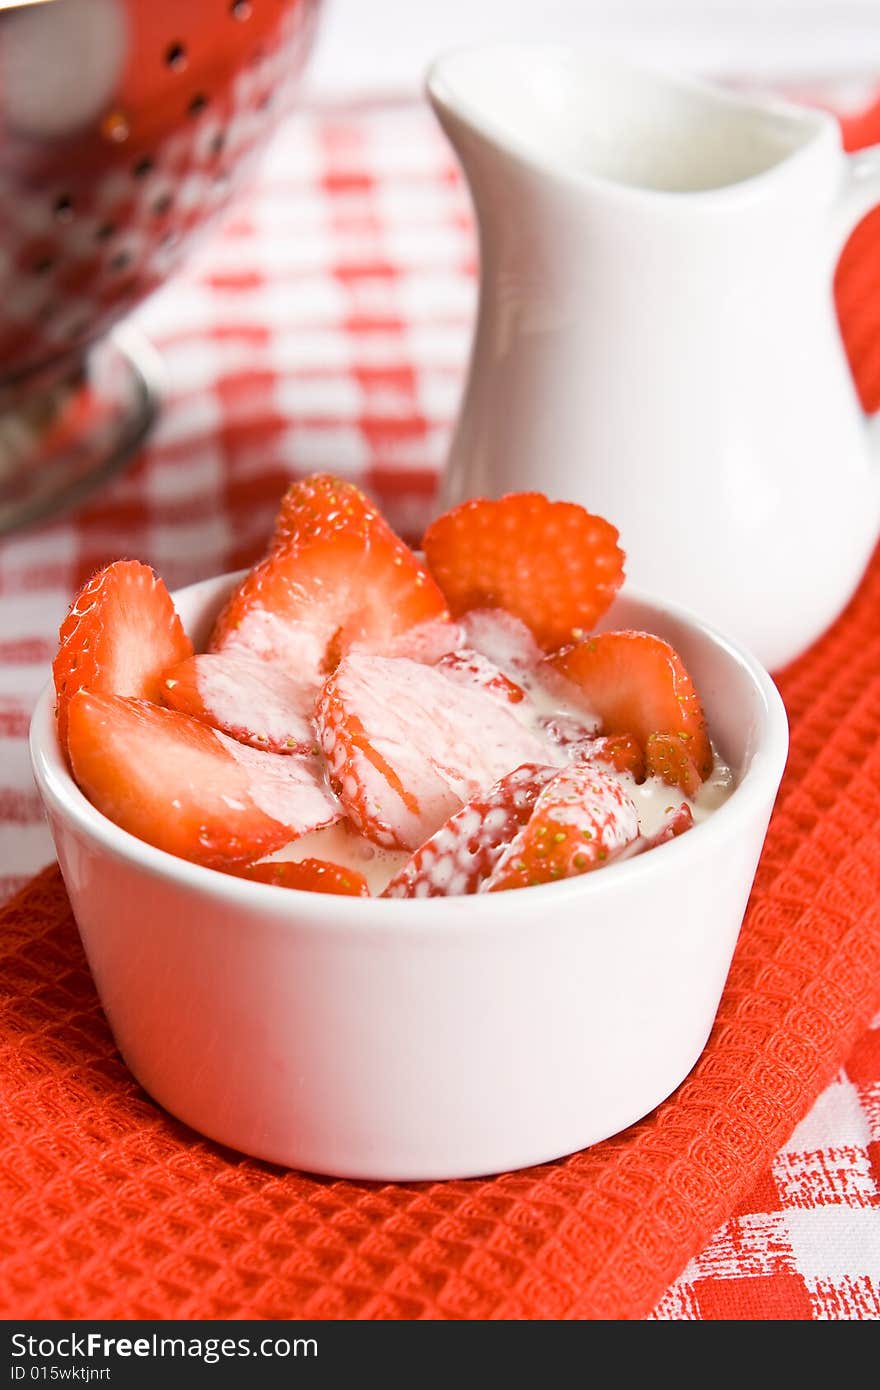 Fresh sliced strawberries with cream in a white pot on a red cloth